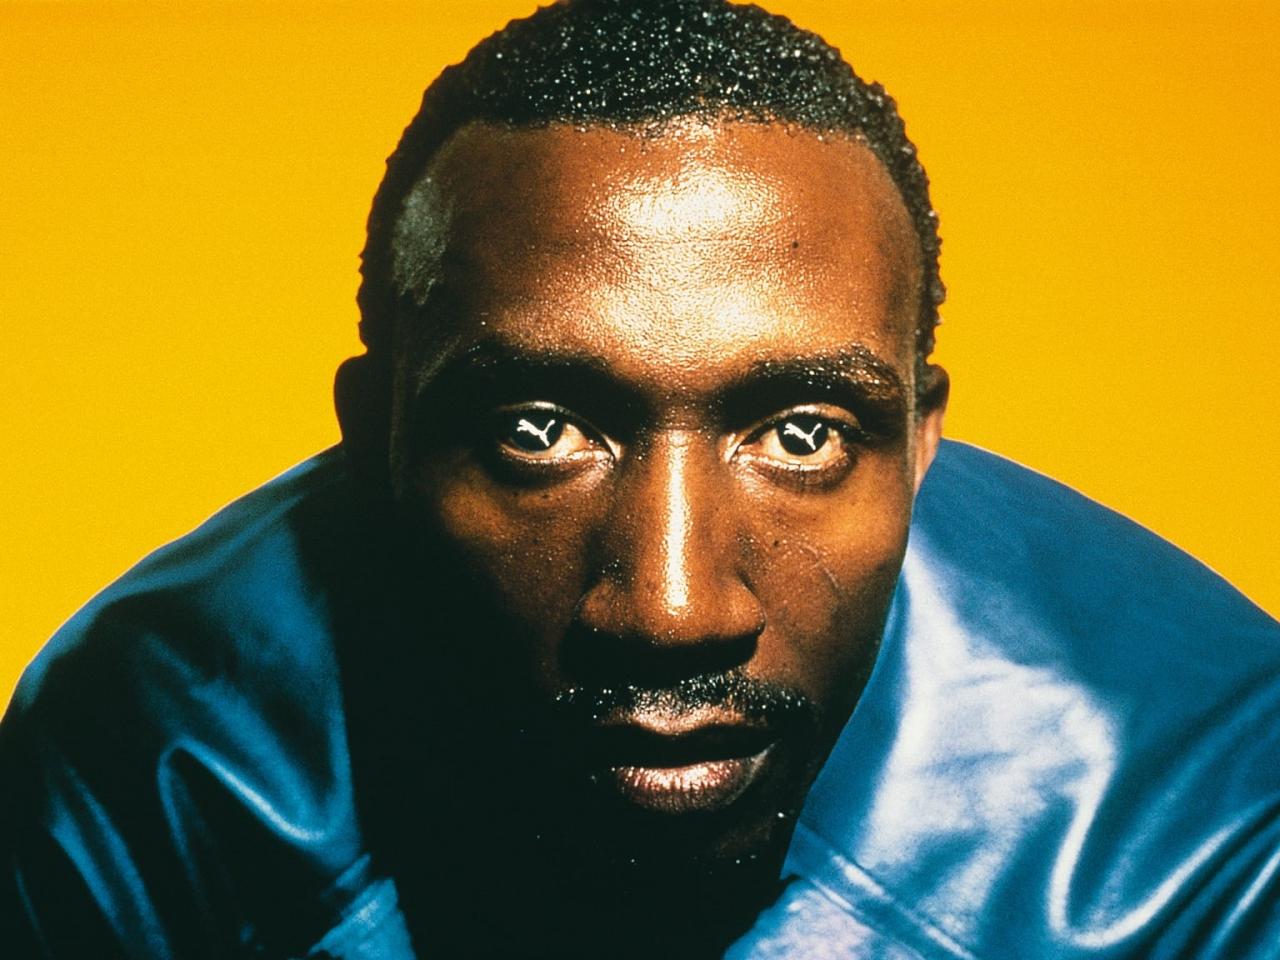 Linford Christie in PUMA contact lenses